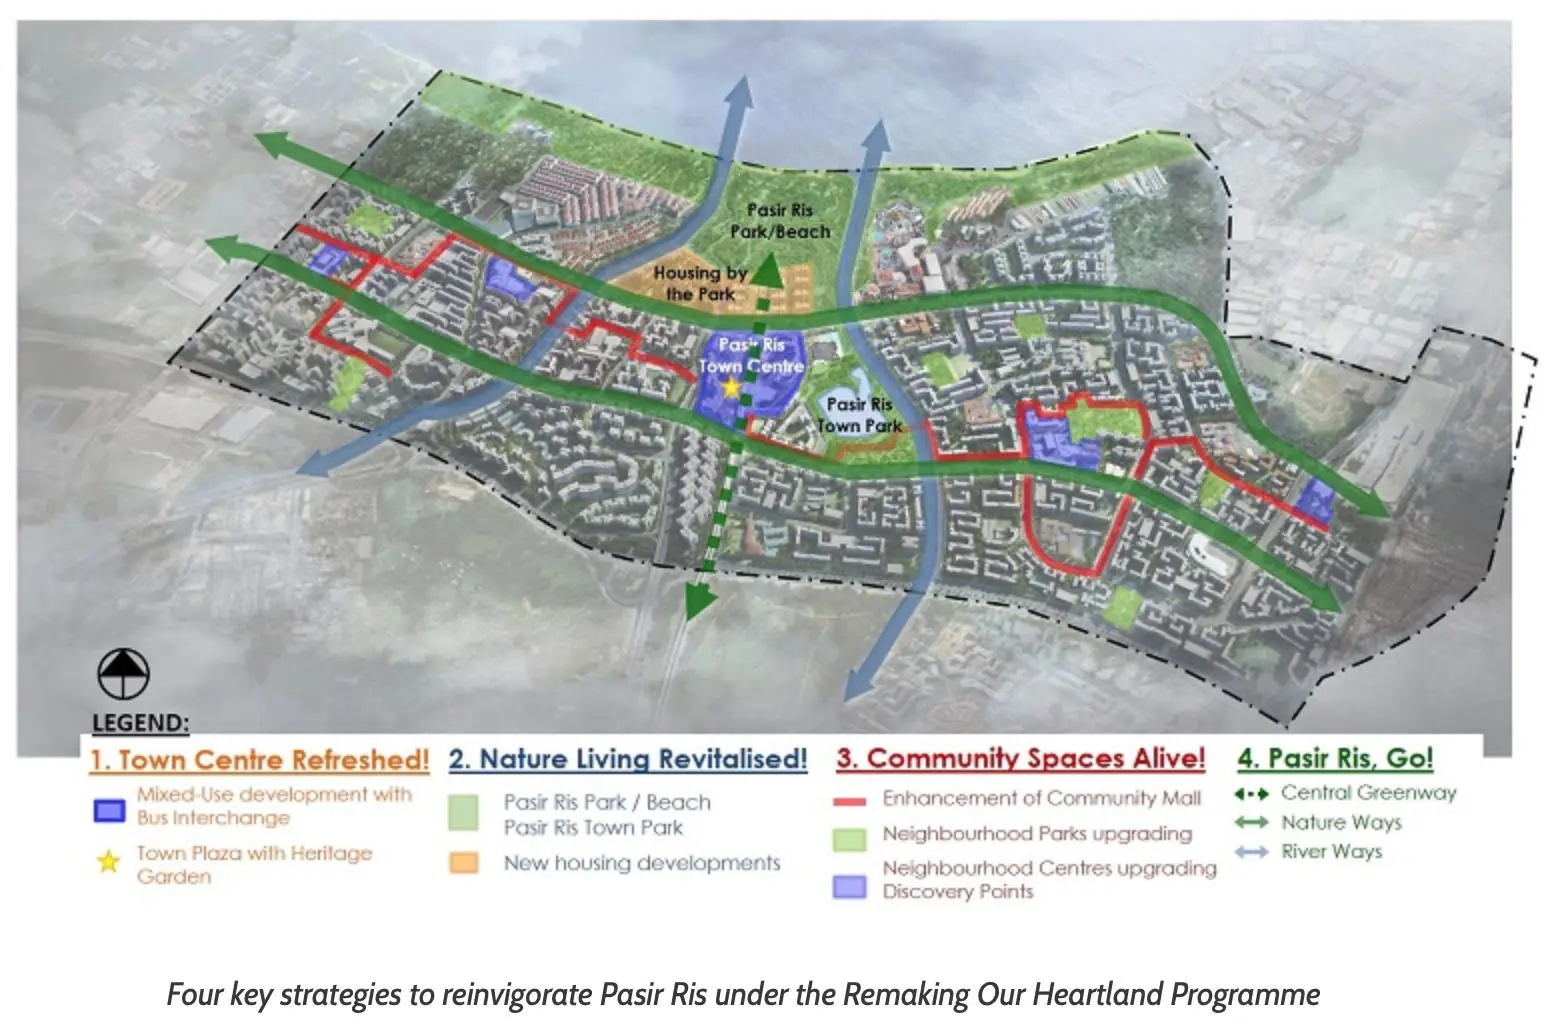 Pasir Ris 8 is part of remaking of our Pasir Ris heartland